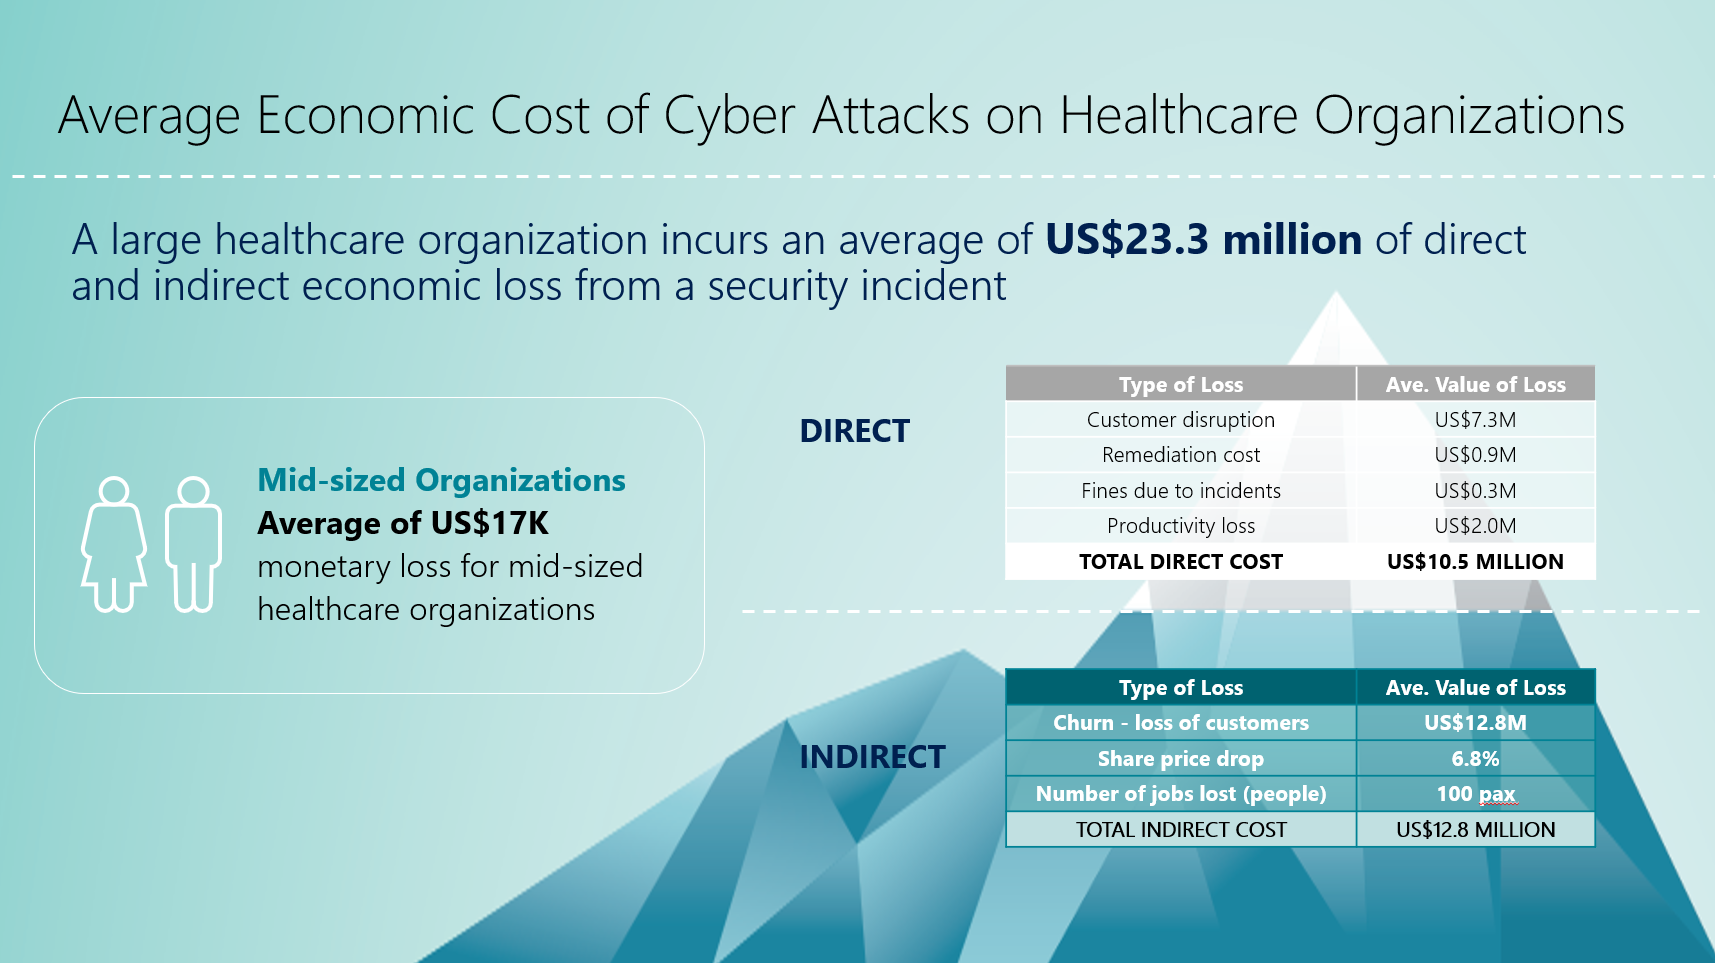 A breakdown of the average direct and indirect economic cost that a large healthcare organization can incur due to a cybersecurity incident.